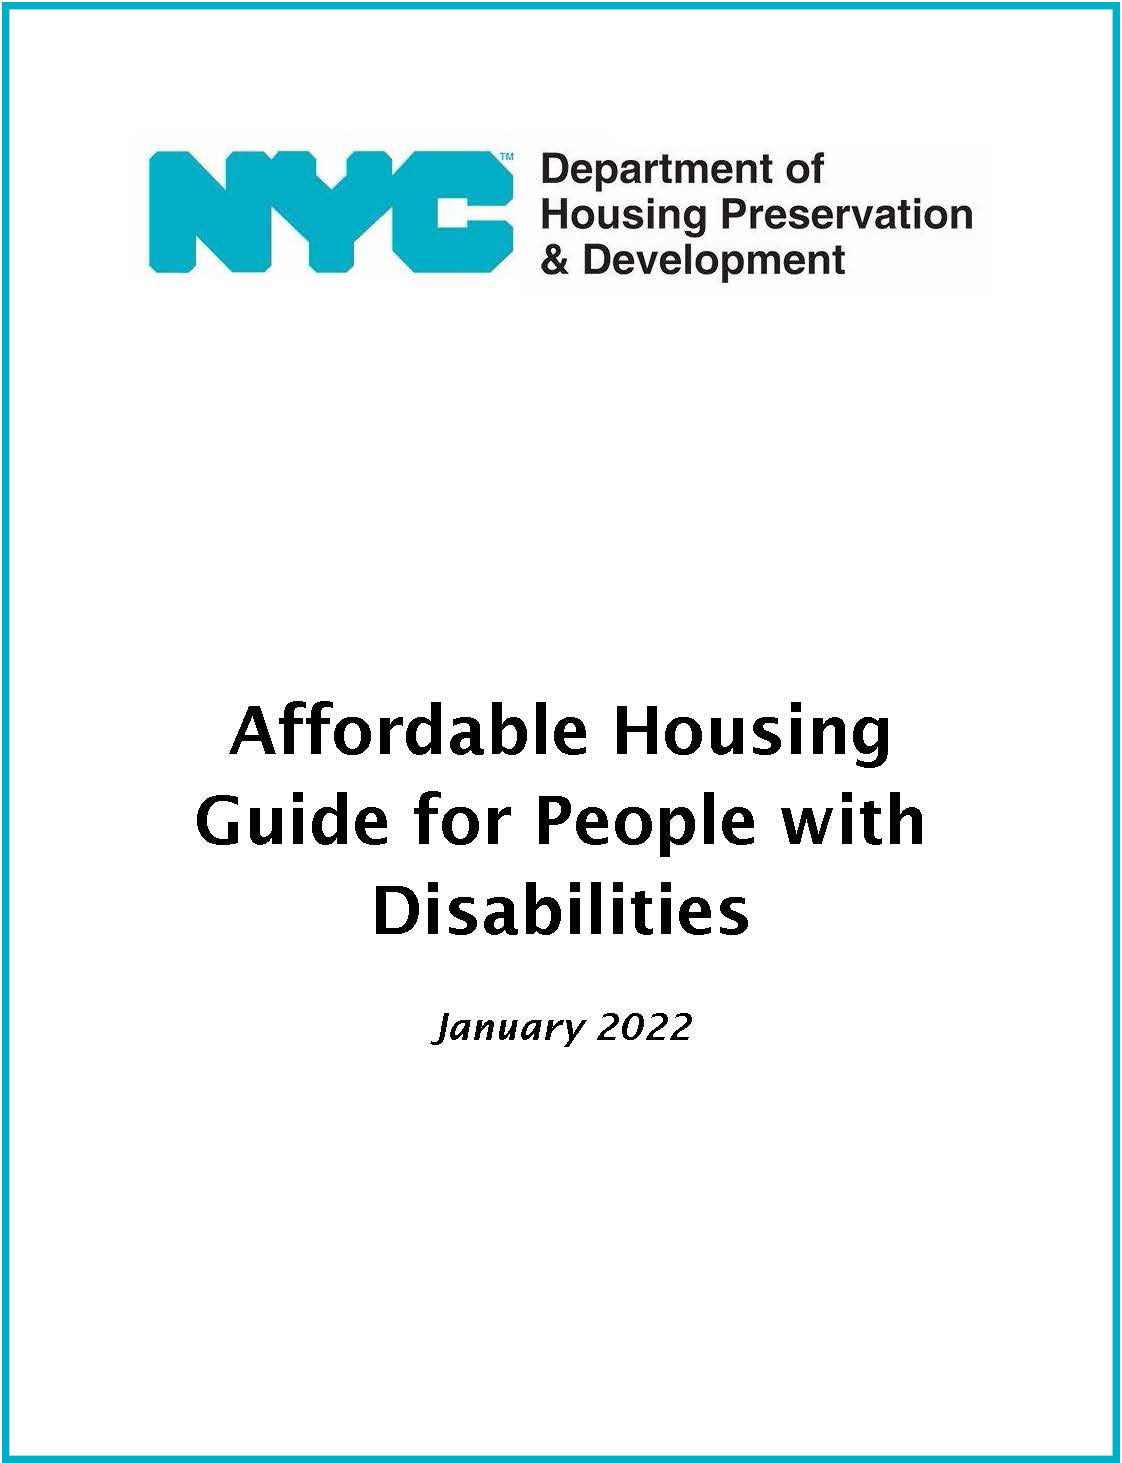 Cover of affordable housing guide for applicants with disabilities